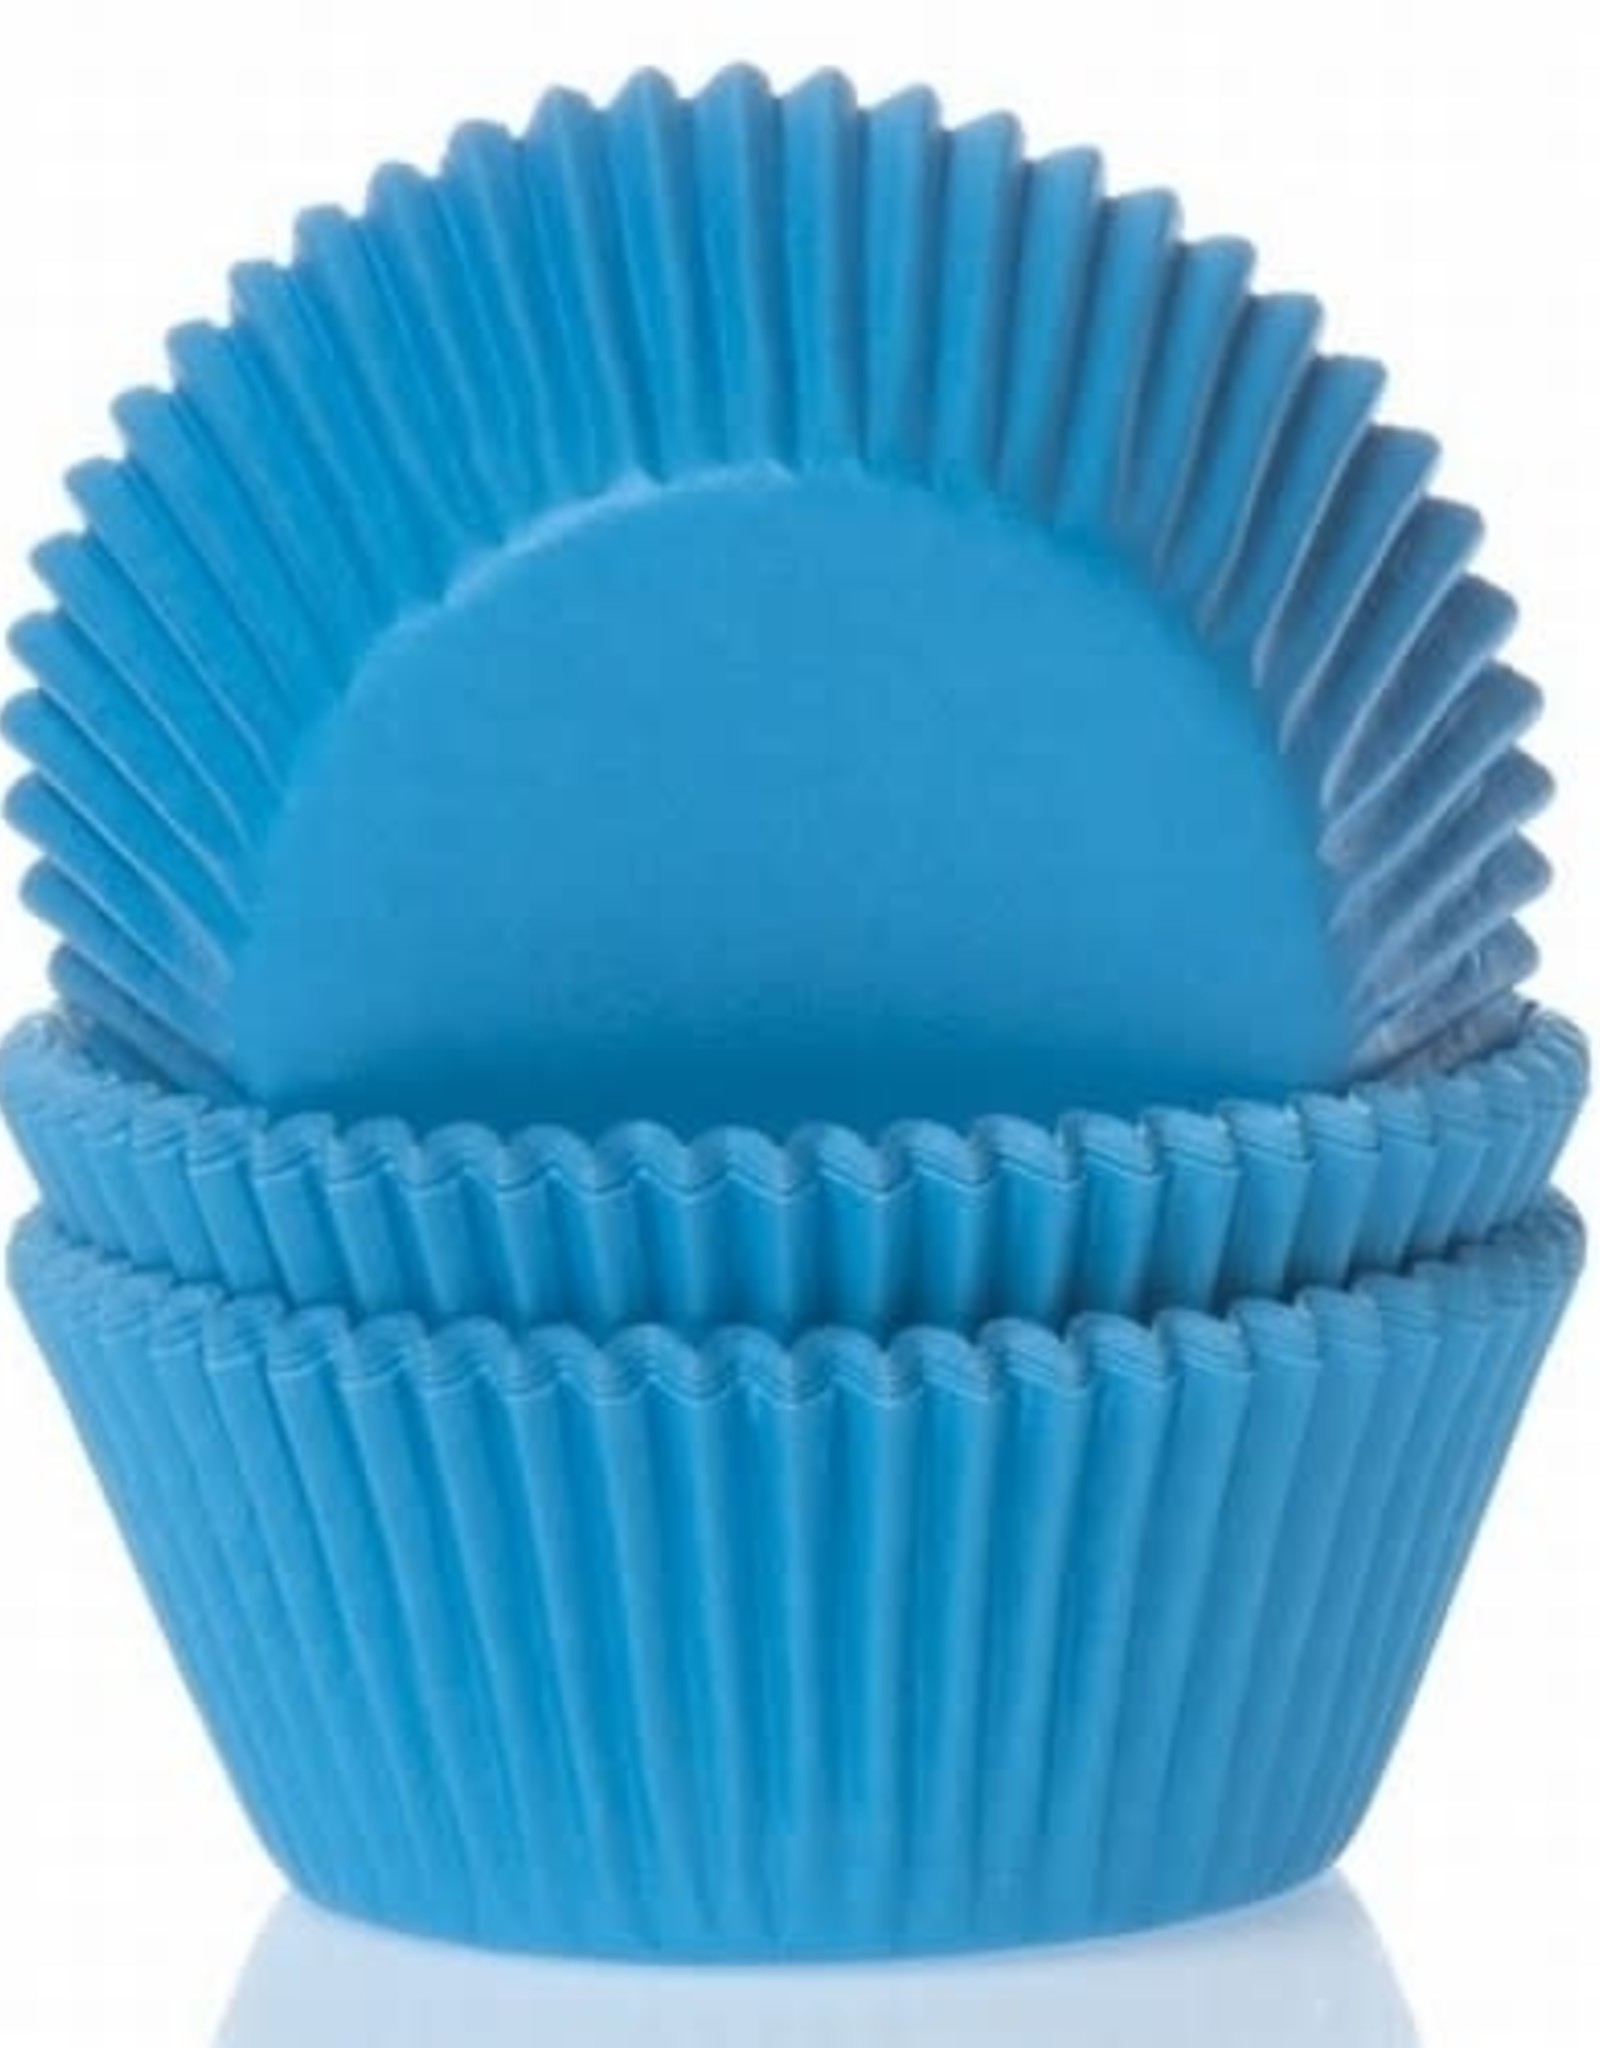 House of Marie House of Marie Baking Cups Cyaan Blauw - pk/50